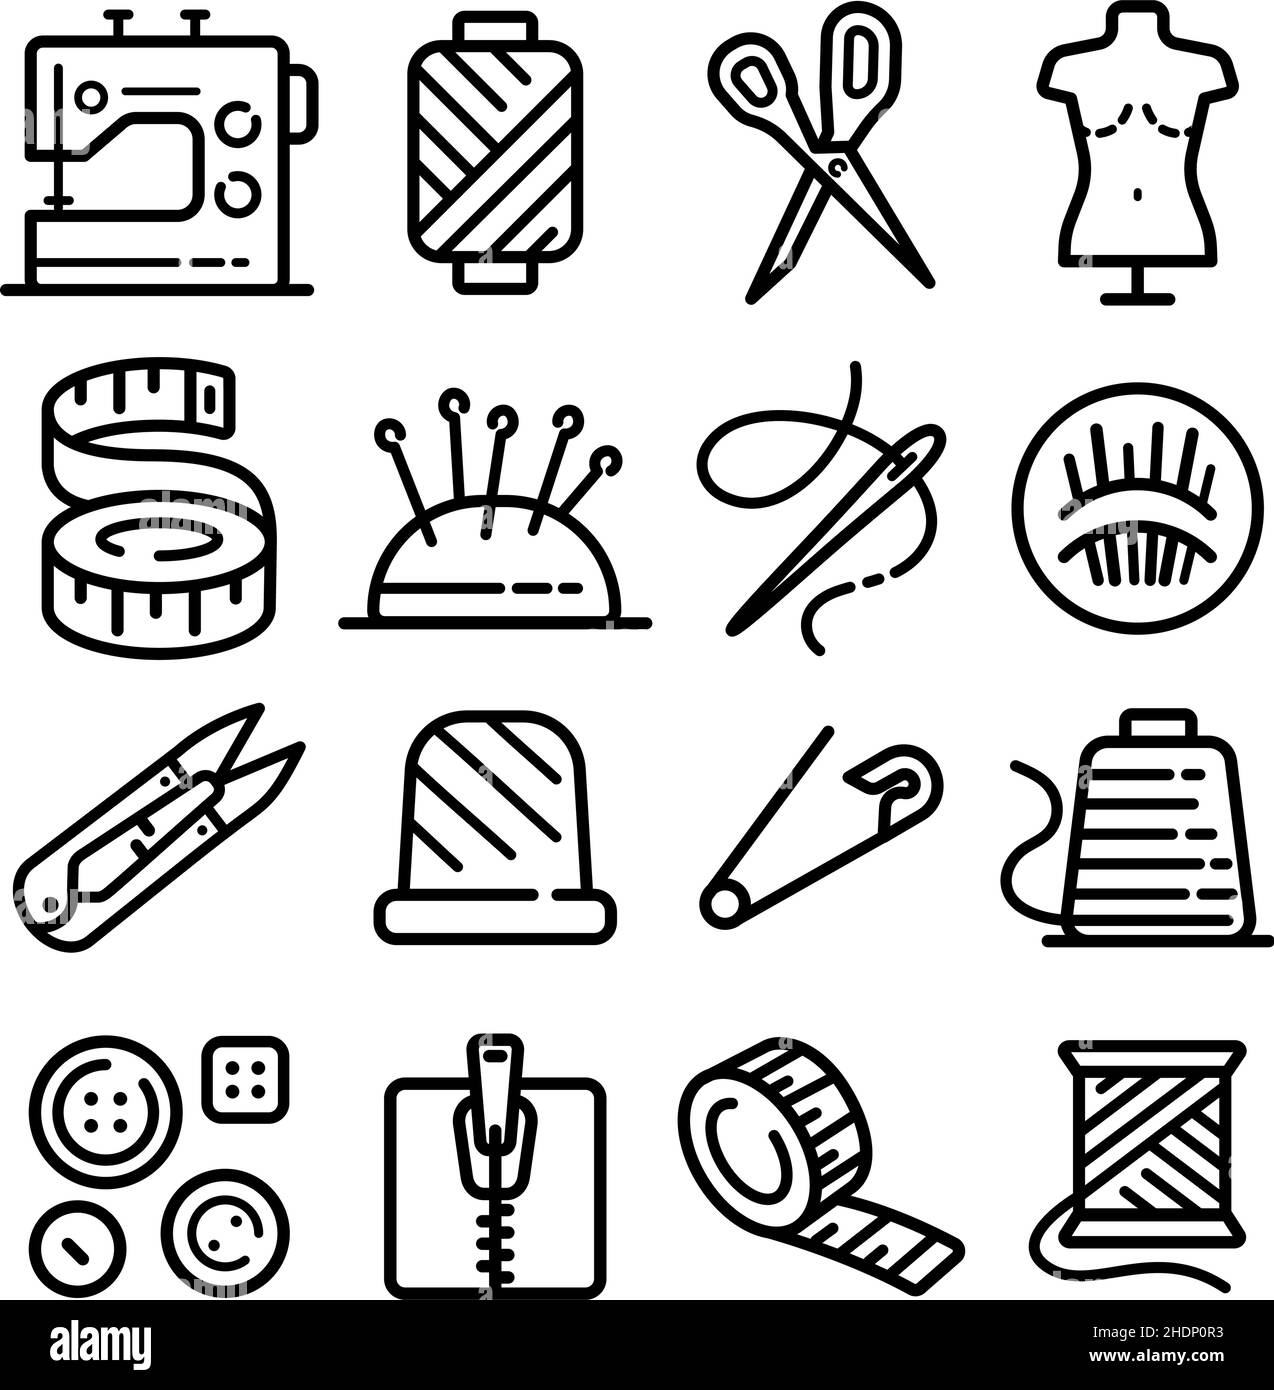 Sewing tools Black and White Stock Photos & Images - Alamy